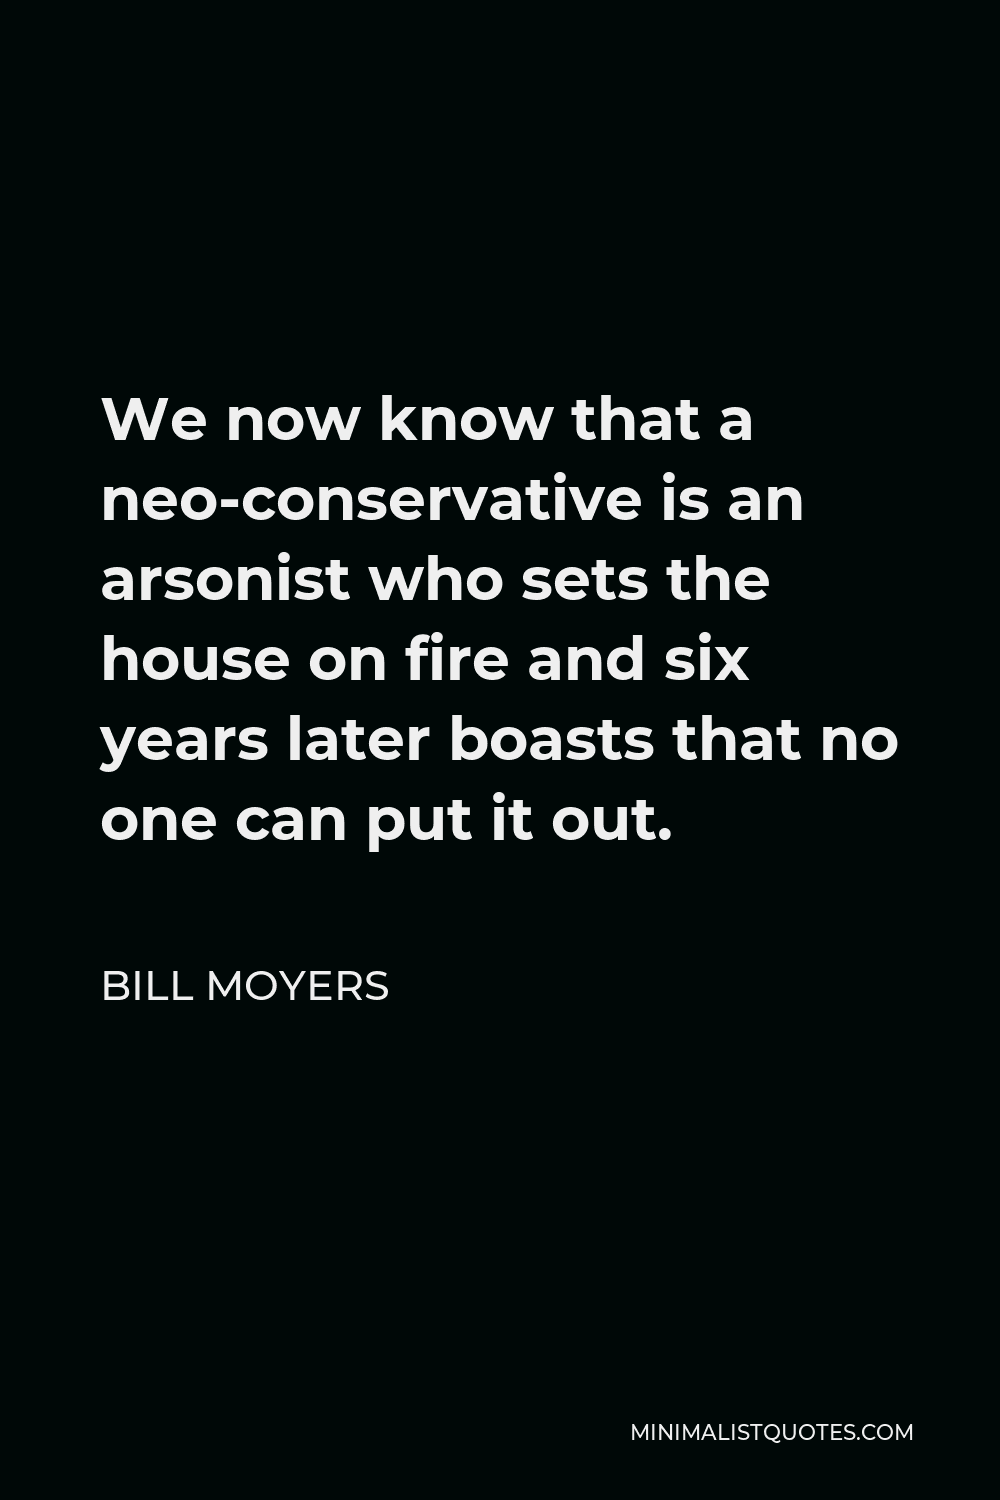 Bill Moyers Quote - We now know that a neo-conservative is an arsonist who sets the house on fire and six years later boasts that no one can put it out.